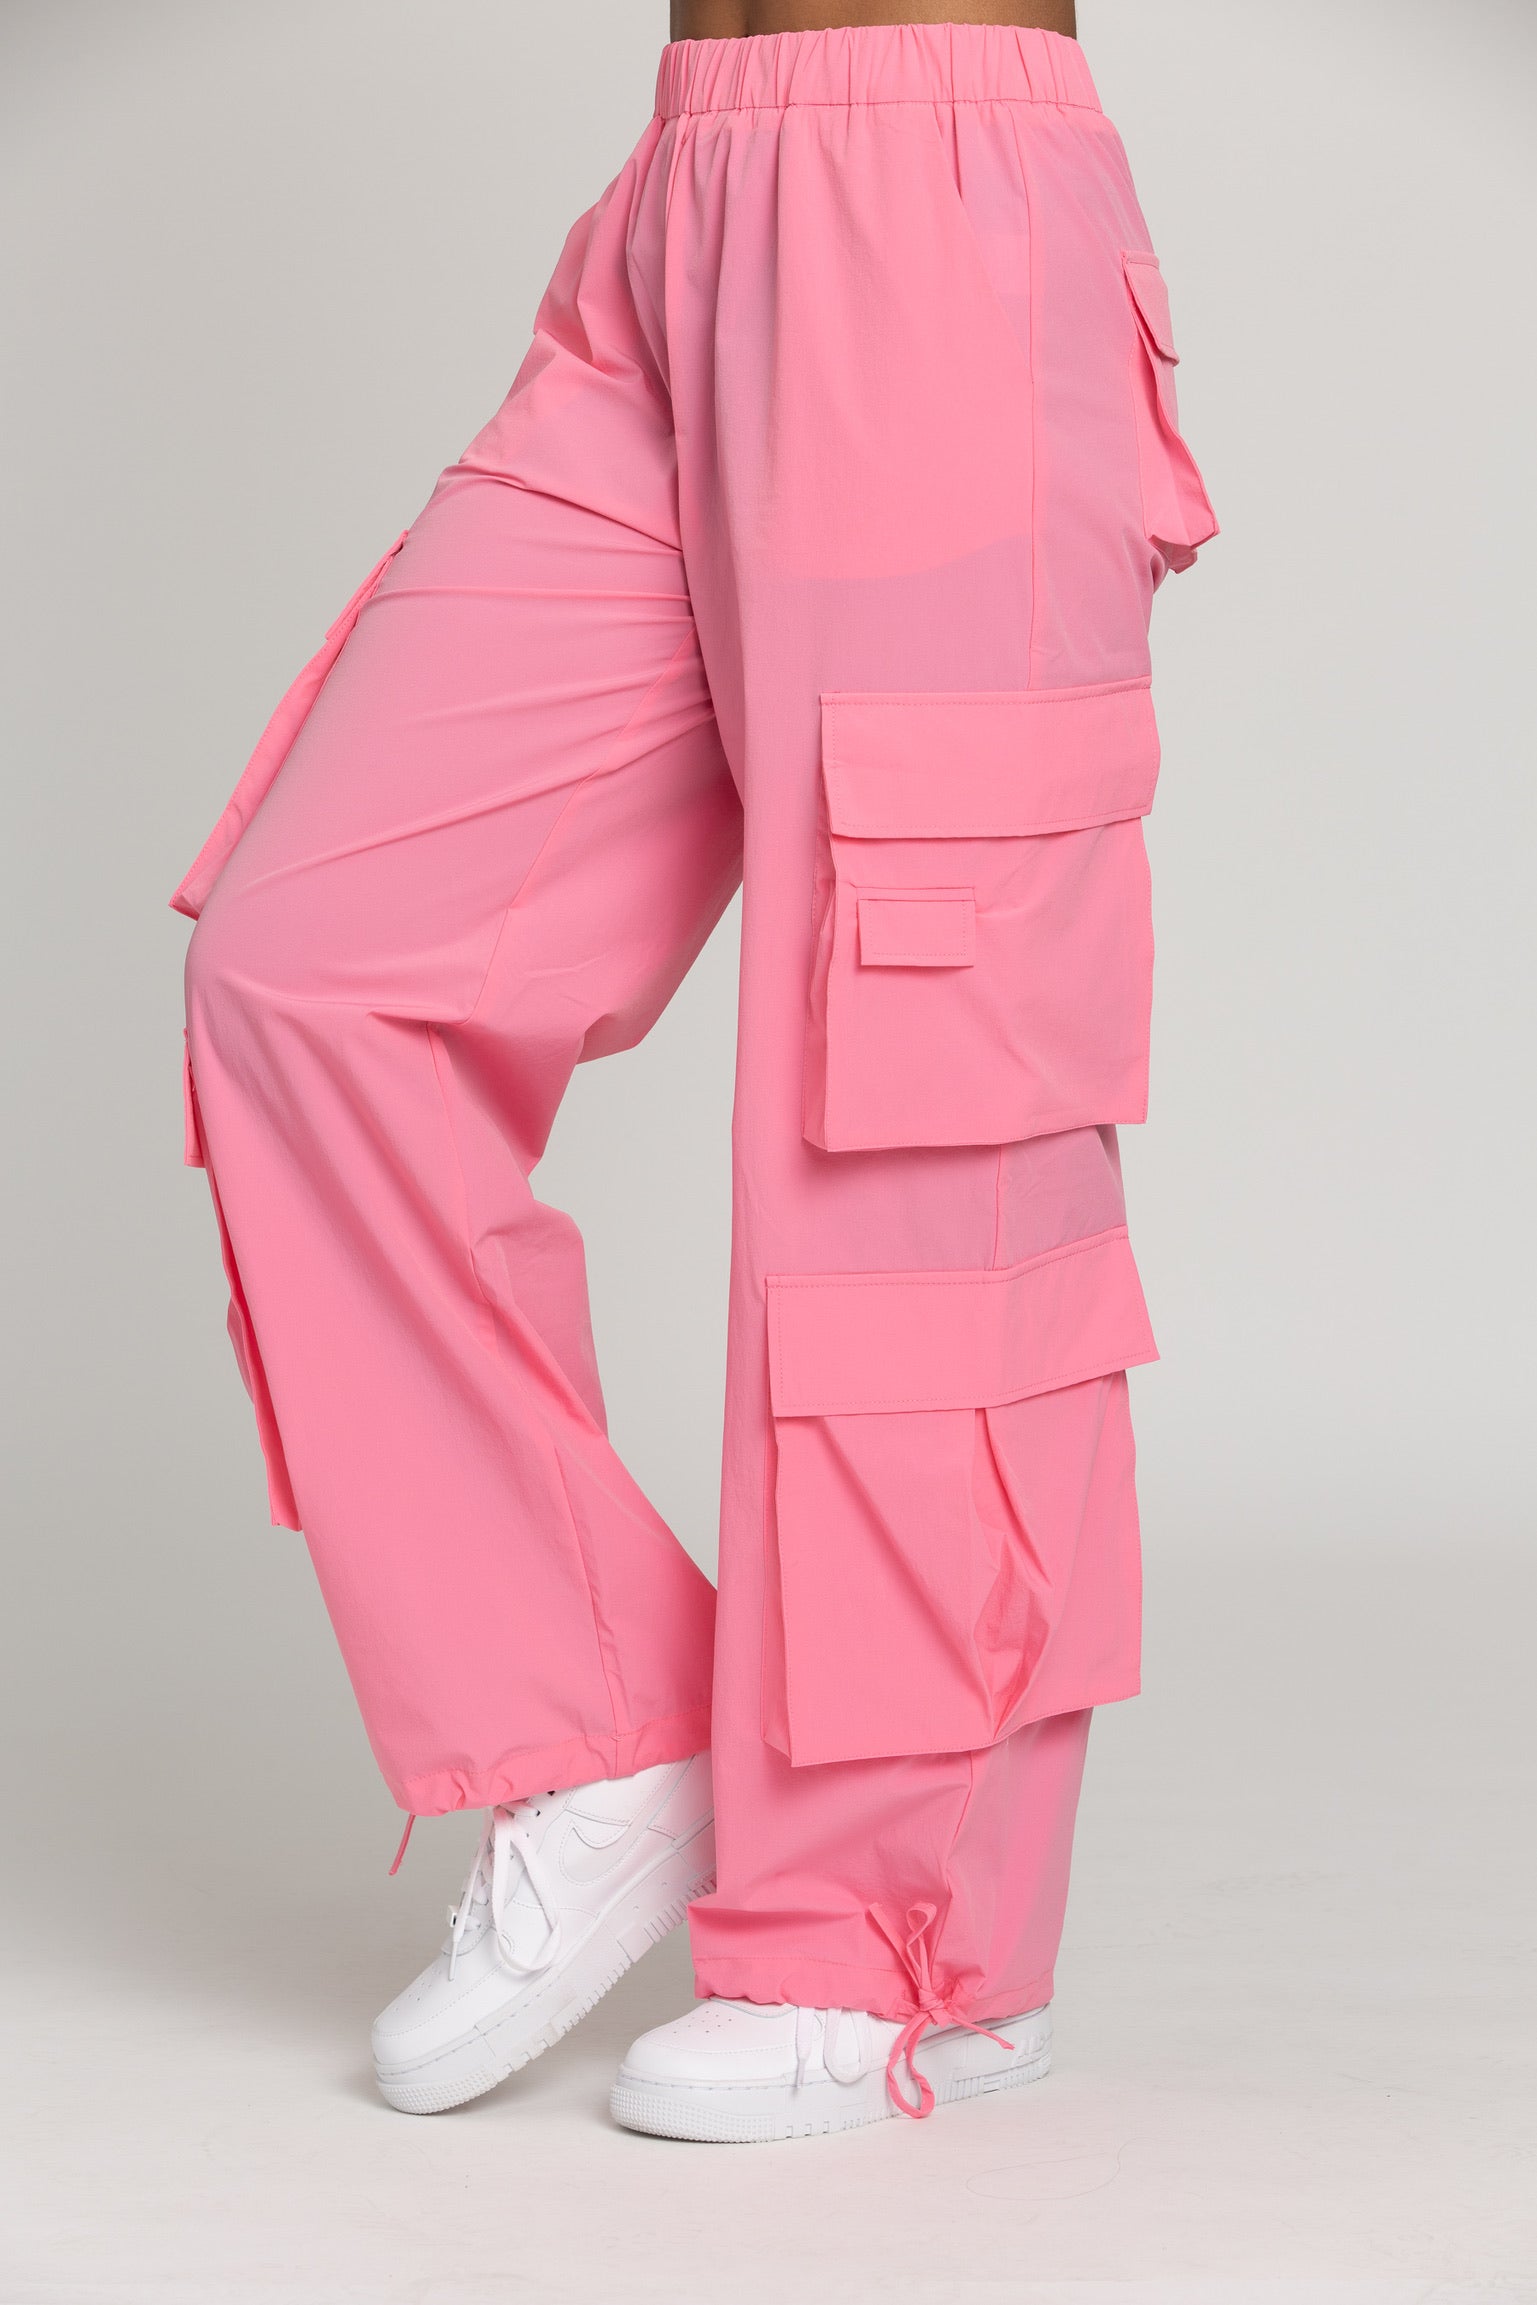 Hot Pink Pants Outfit | High Waist Hot Pink Aesthetic Slit Pants – TGC  FASHION